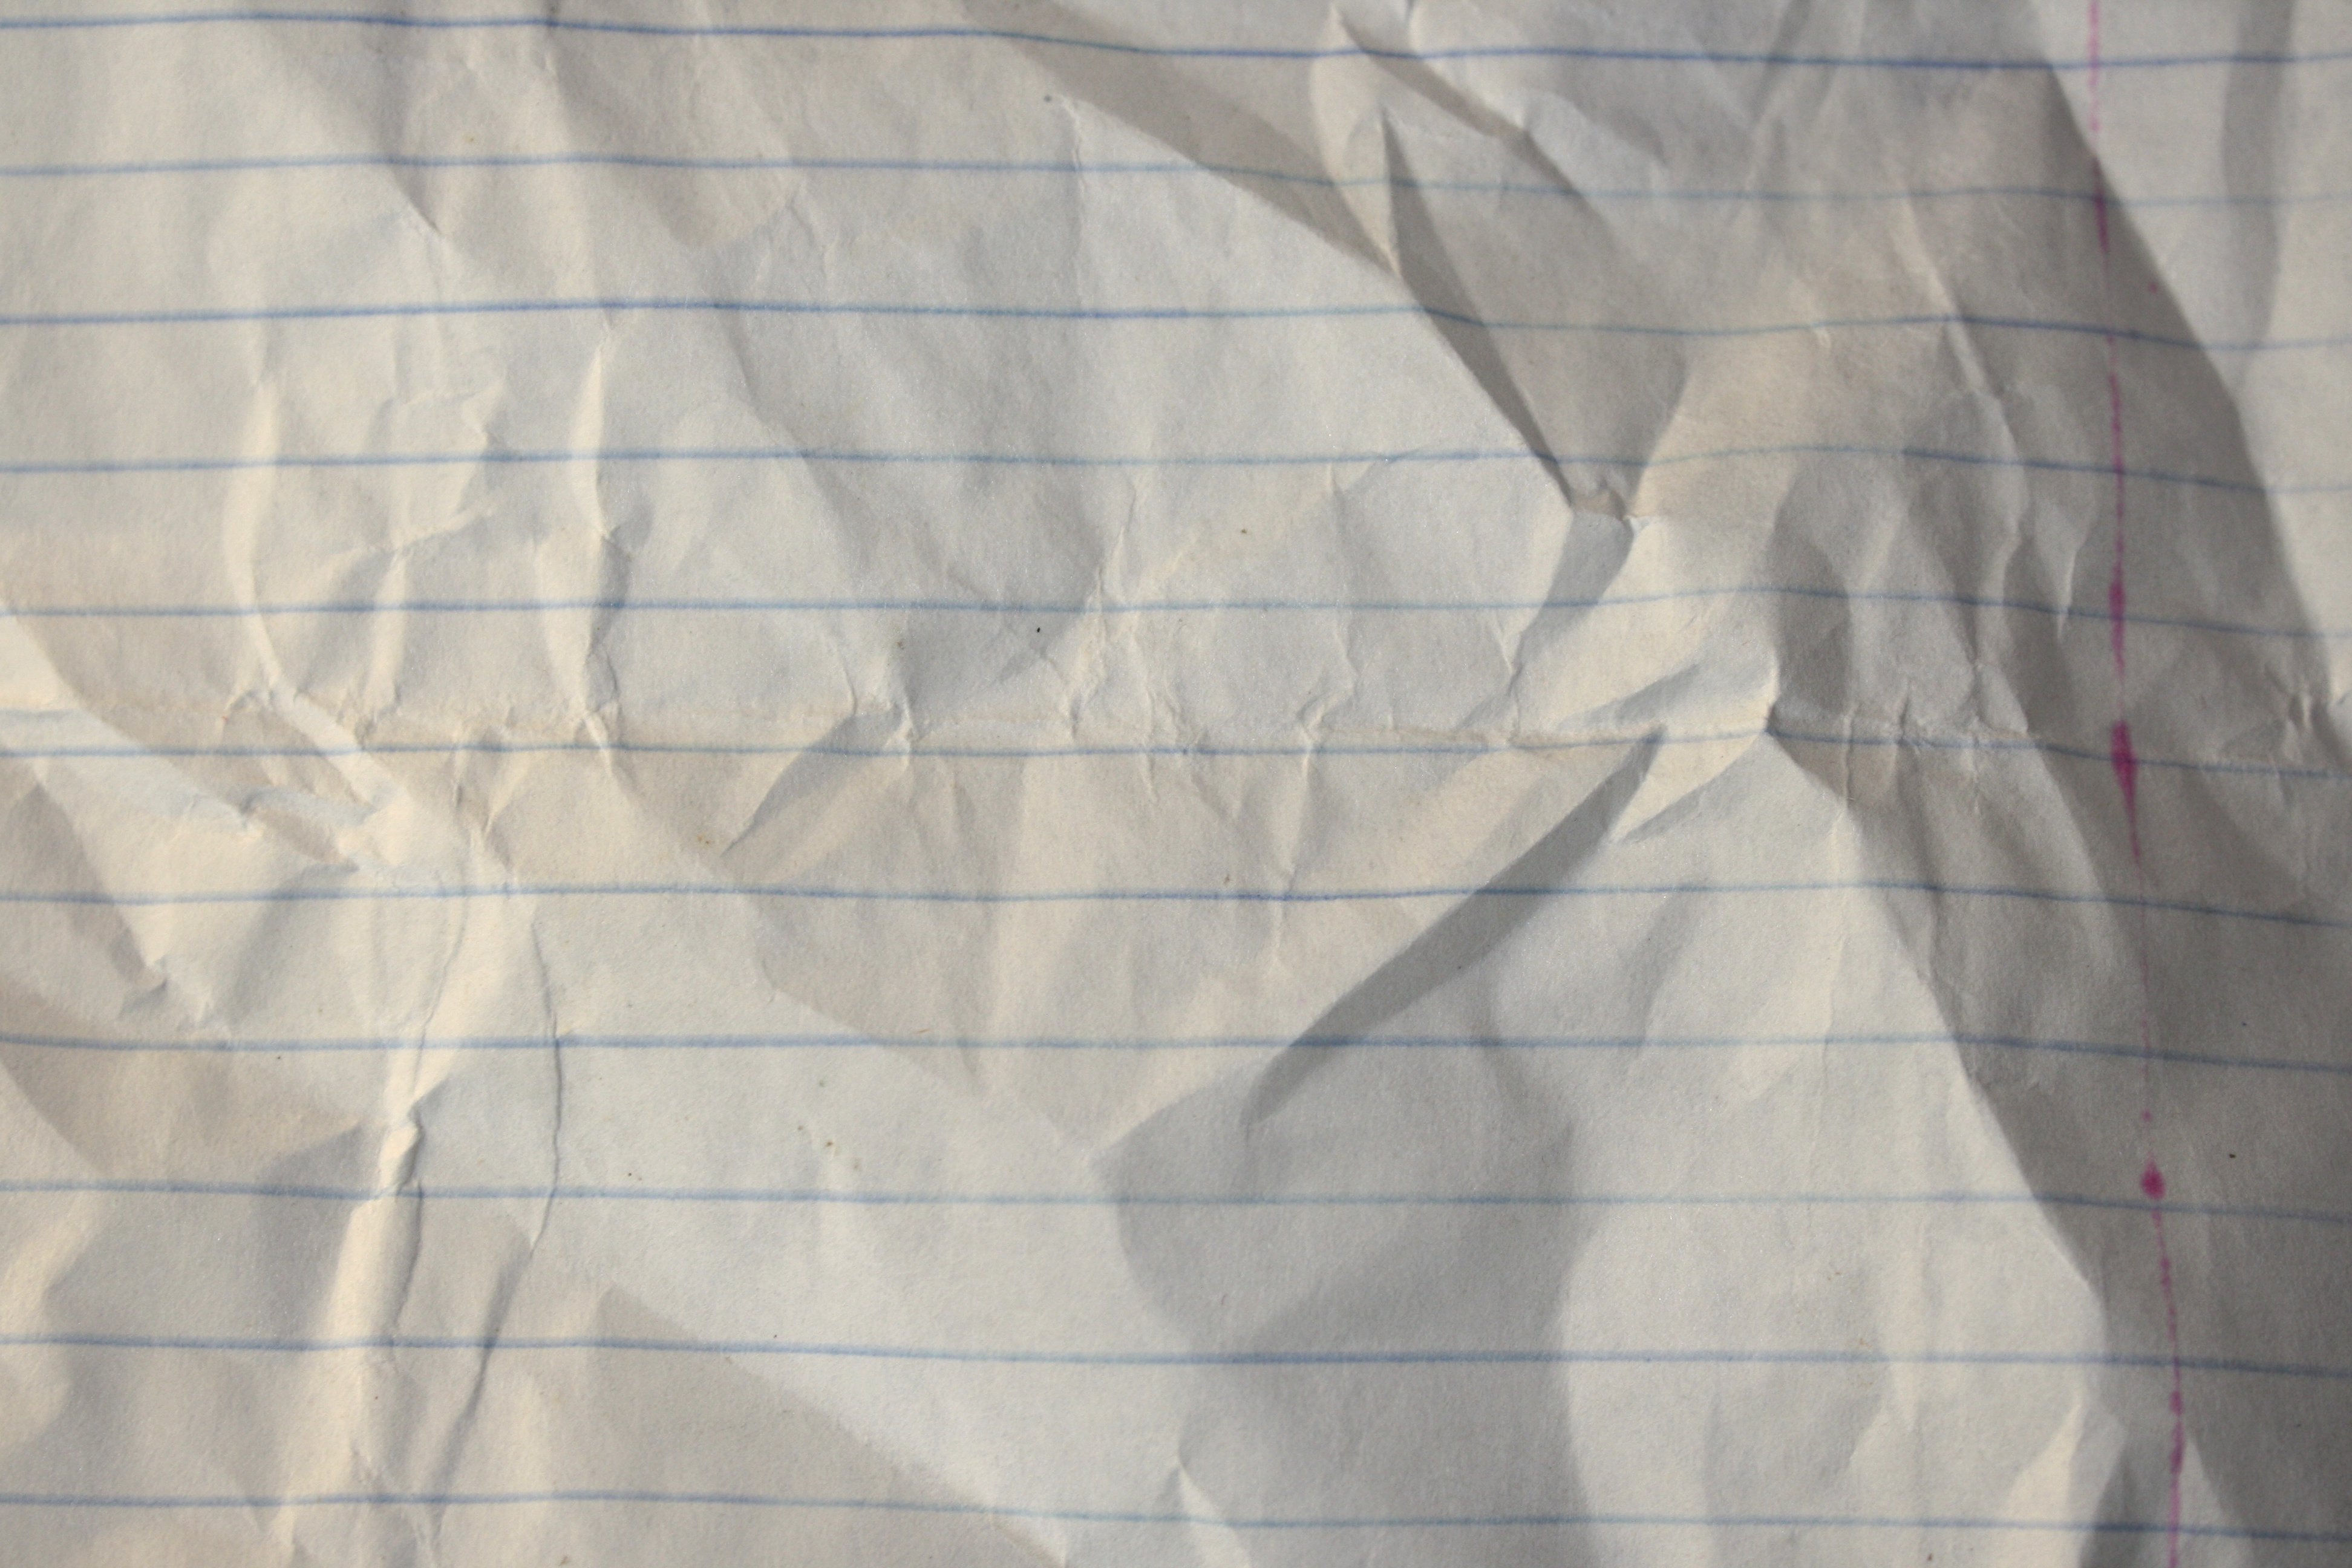 Crumpled Lined Paper Texture